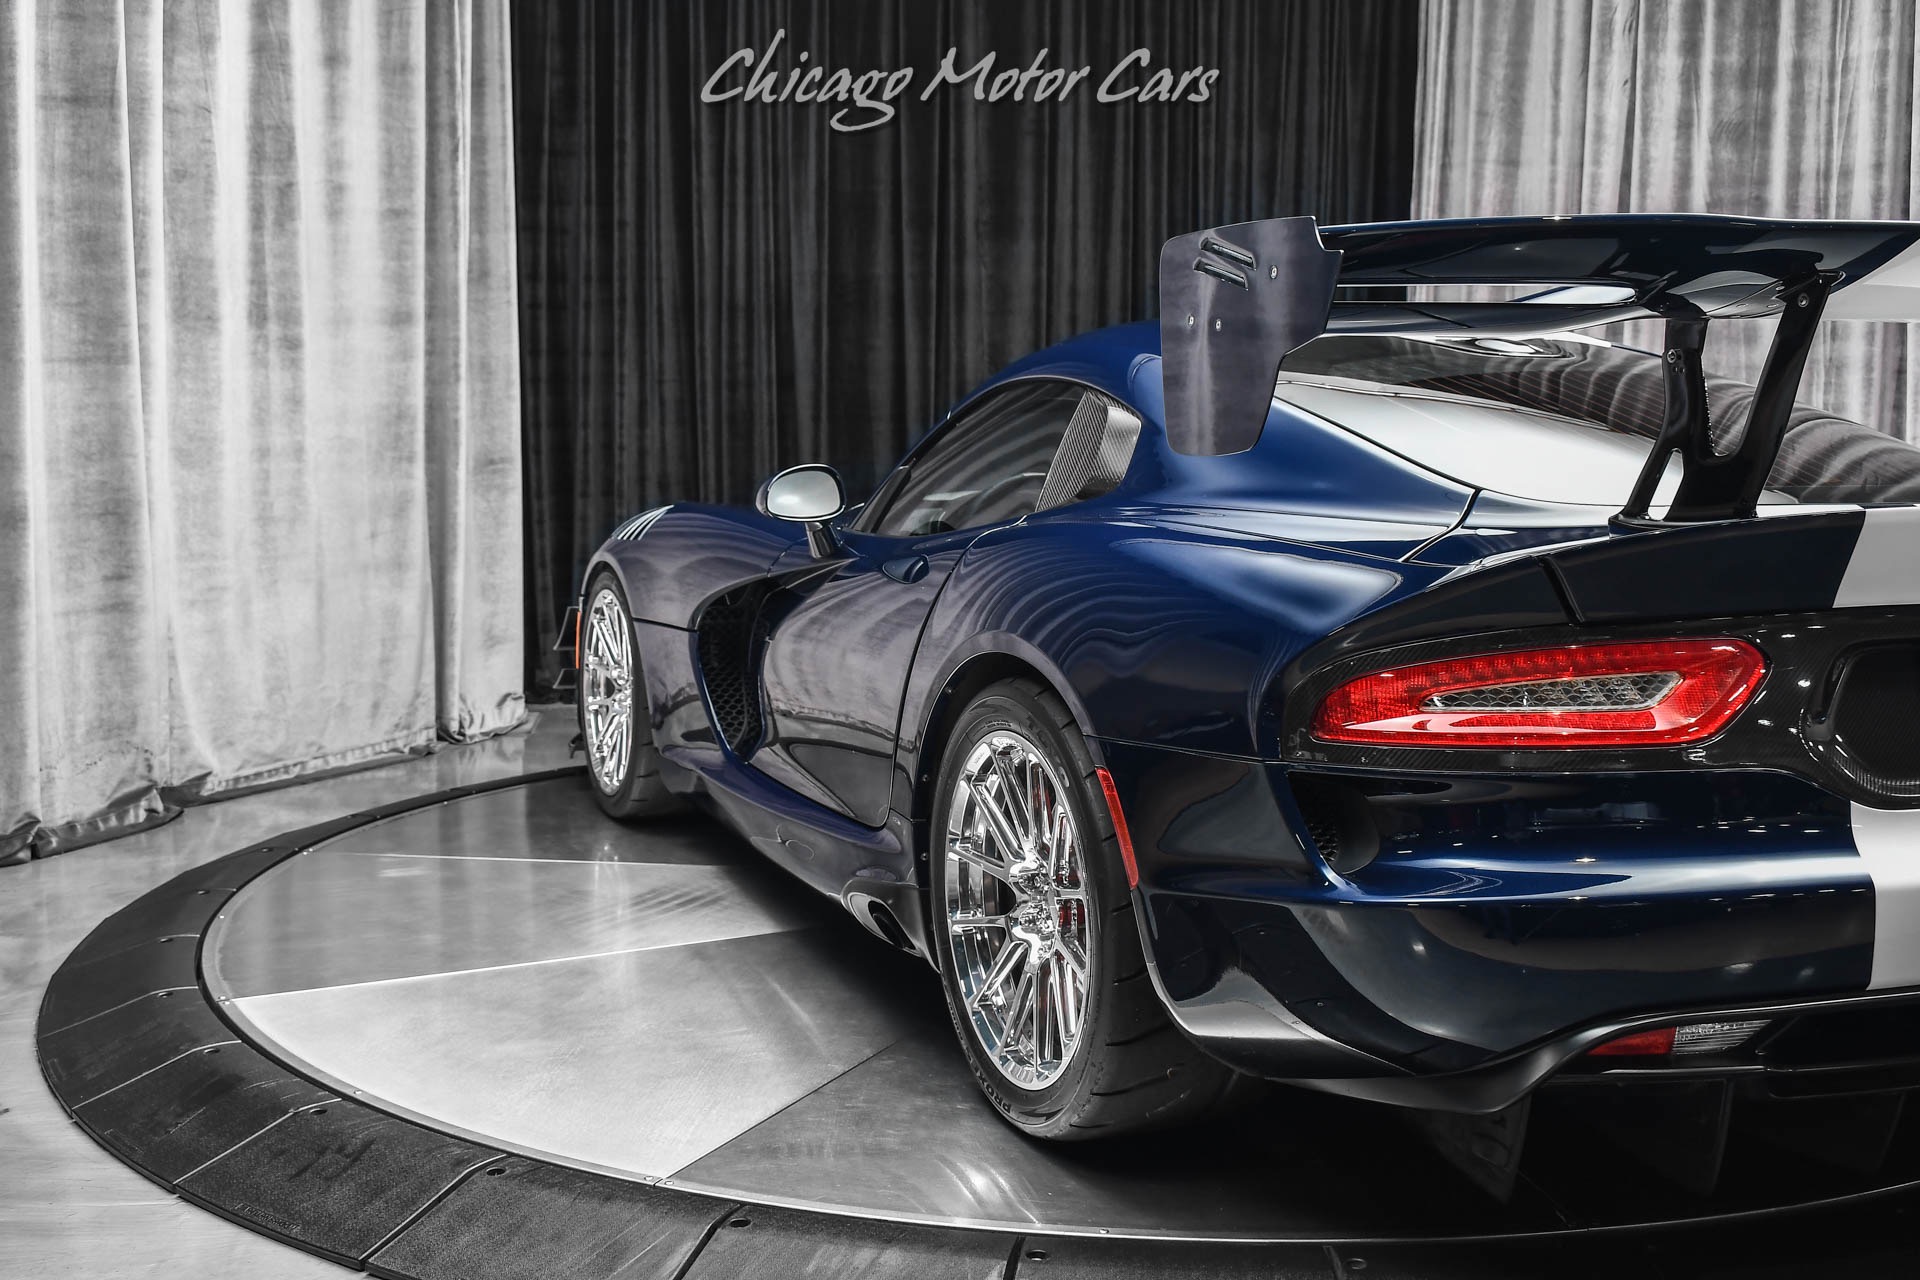 Used 2016 Dodge Viper Acr Extreme Calvo Cm1800 Ppg Sequential Trans For Sale Special Pricing